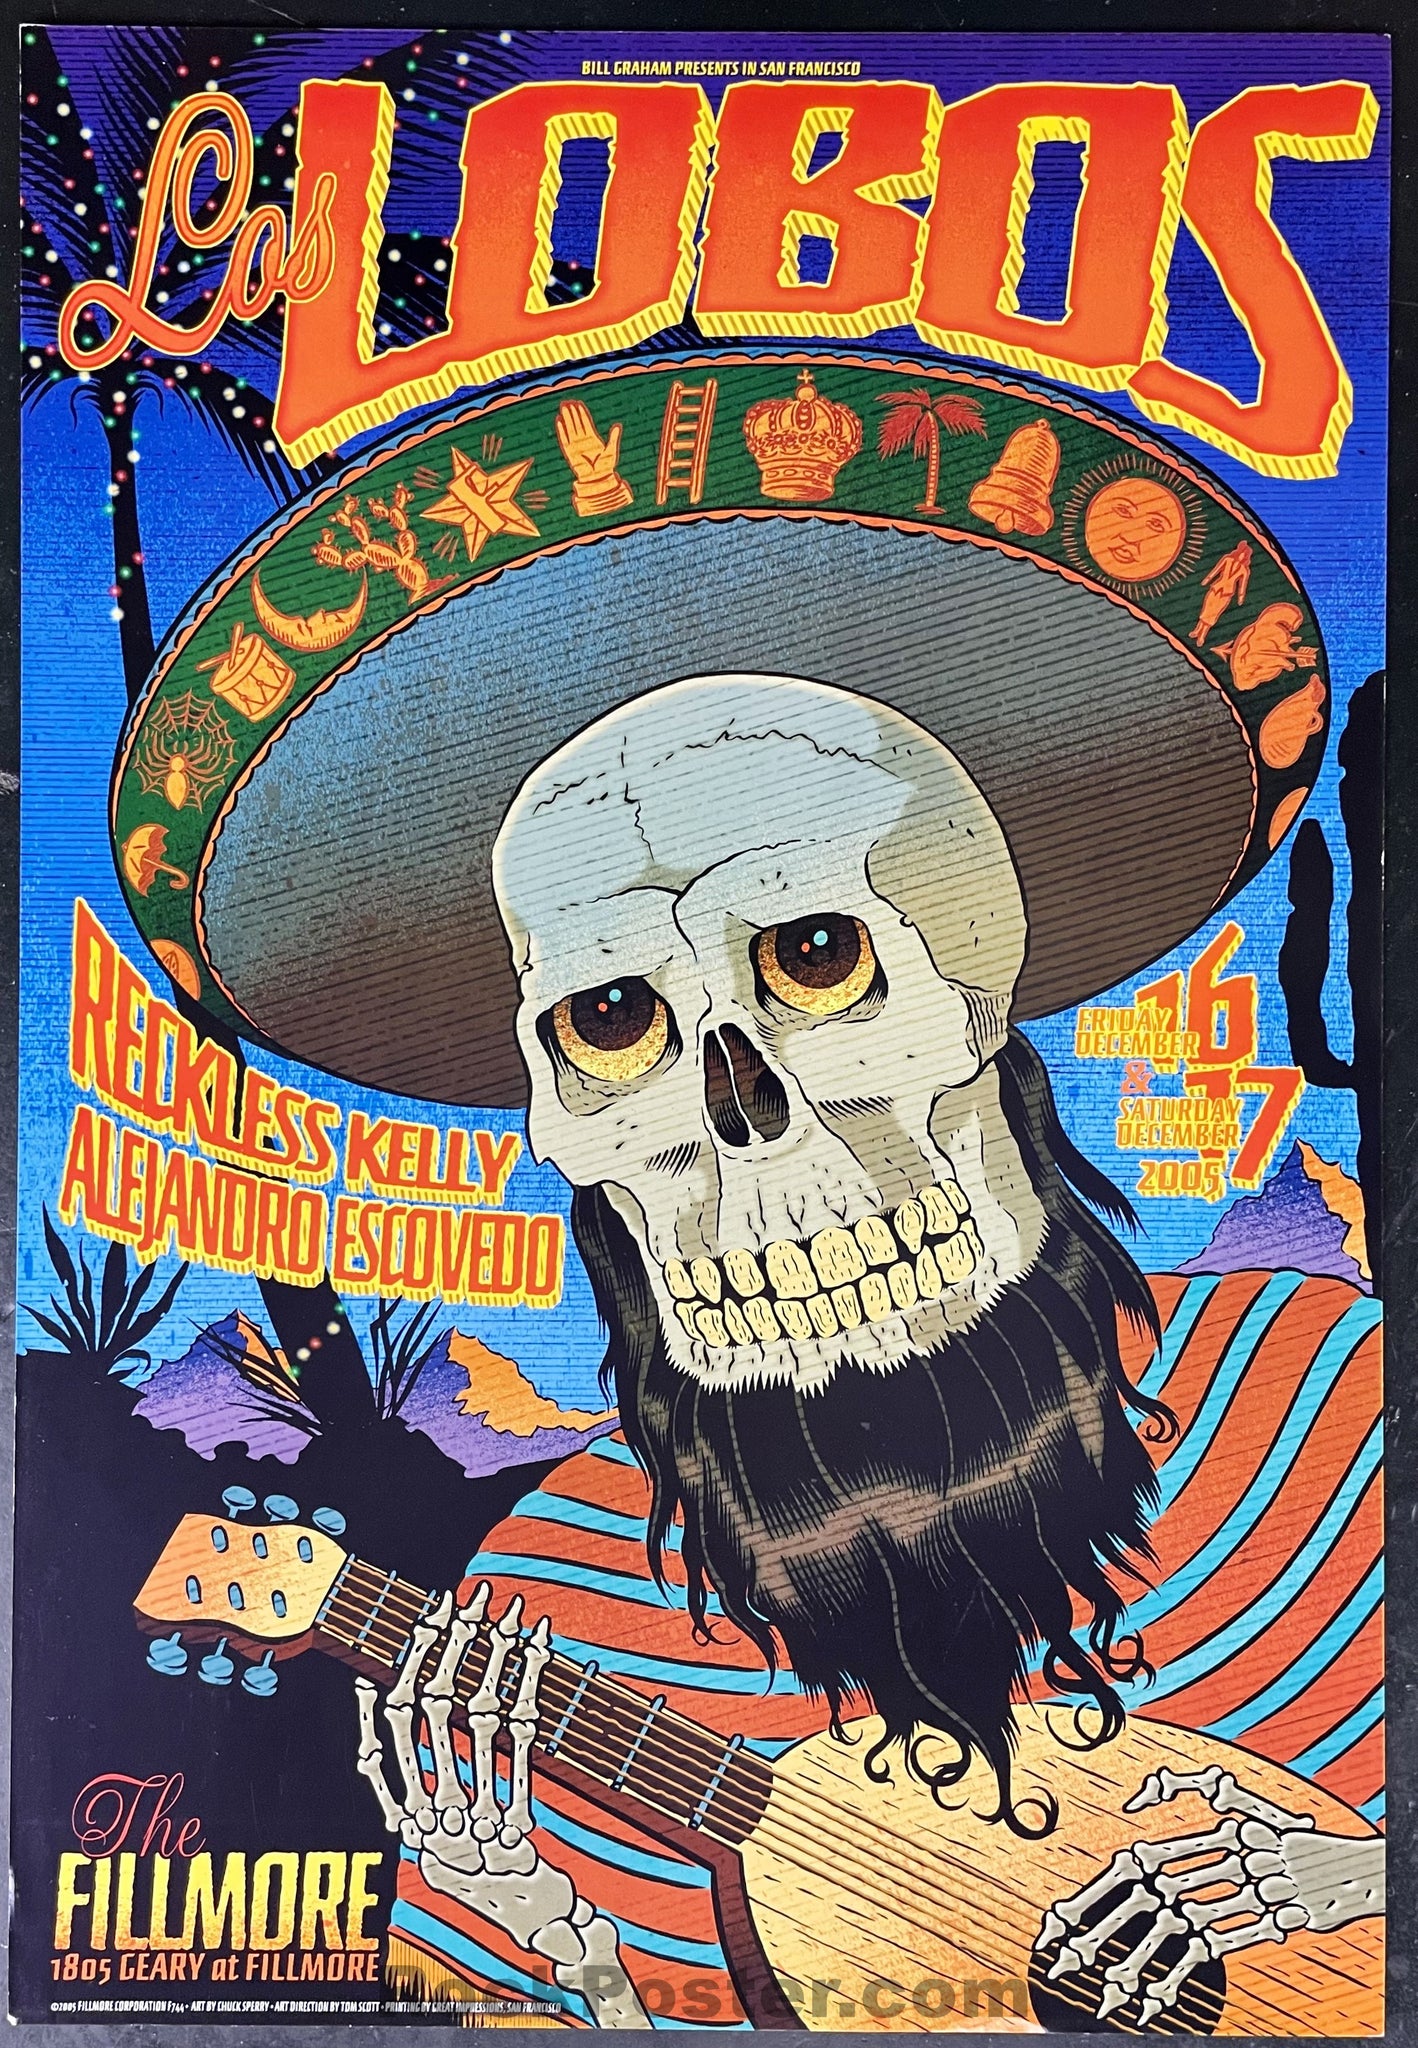 NF-744 - Los Lobos - Chuck Sperry - 2006 Poster - The Fillmore - Excellent